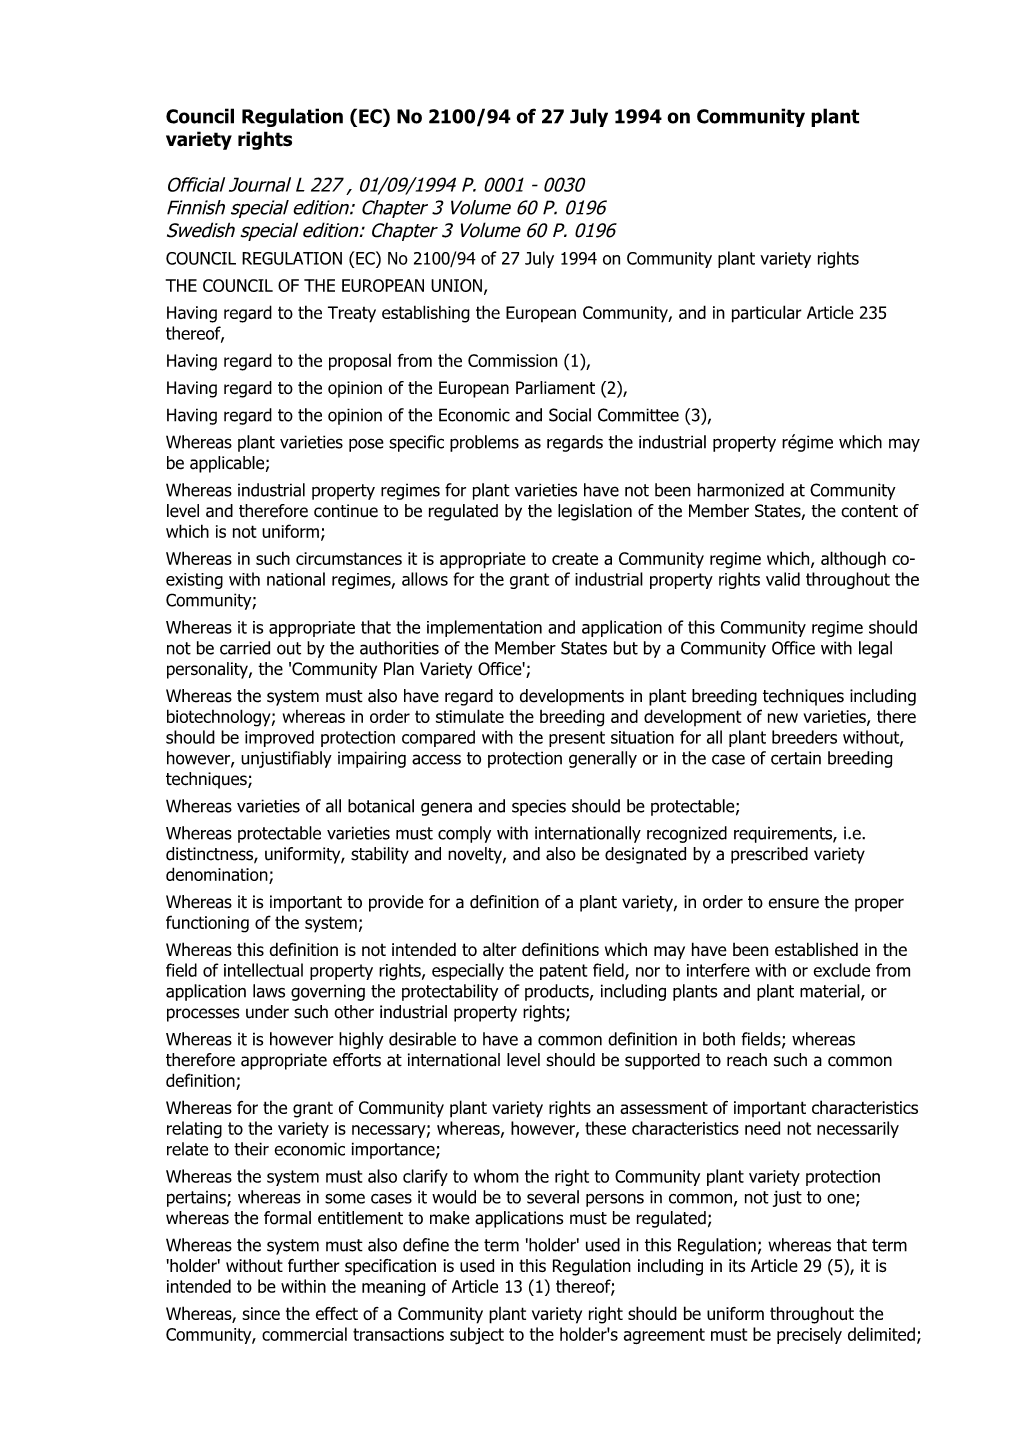 Council Regulation (EC) No 2100/94 of 27 July 1994 on Community Plant Variety Rights